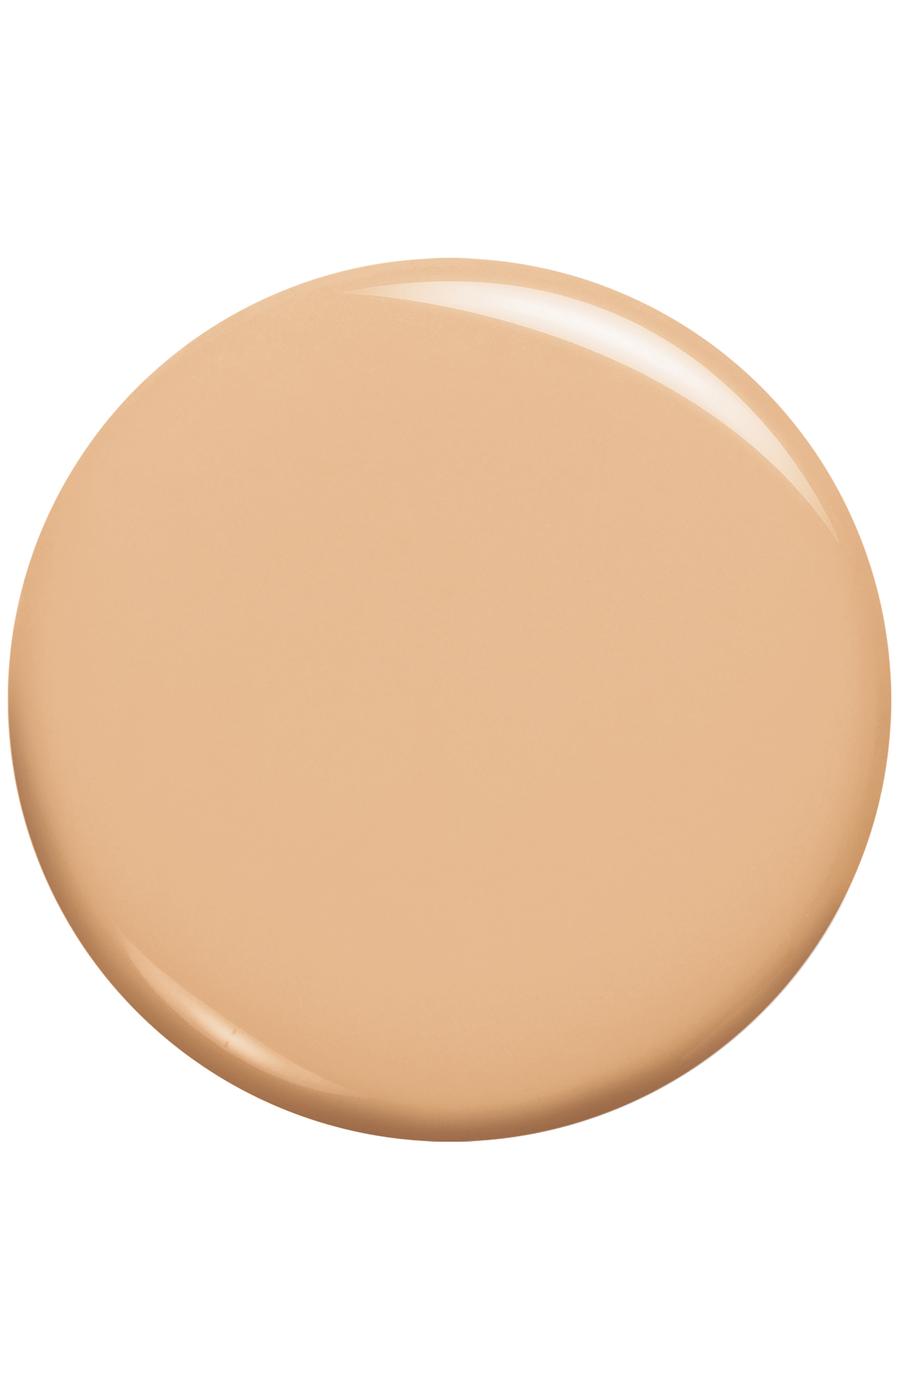 L'Oréal Paris Infallible Up to 24 Hour Fresh Wear Foundation - Lightweight Natural Rose; image 3 of 7